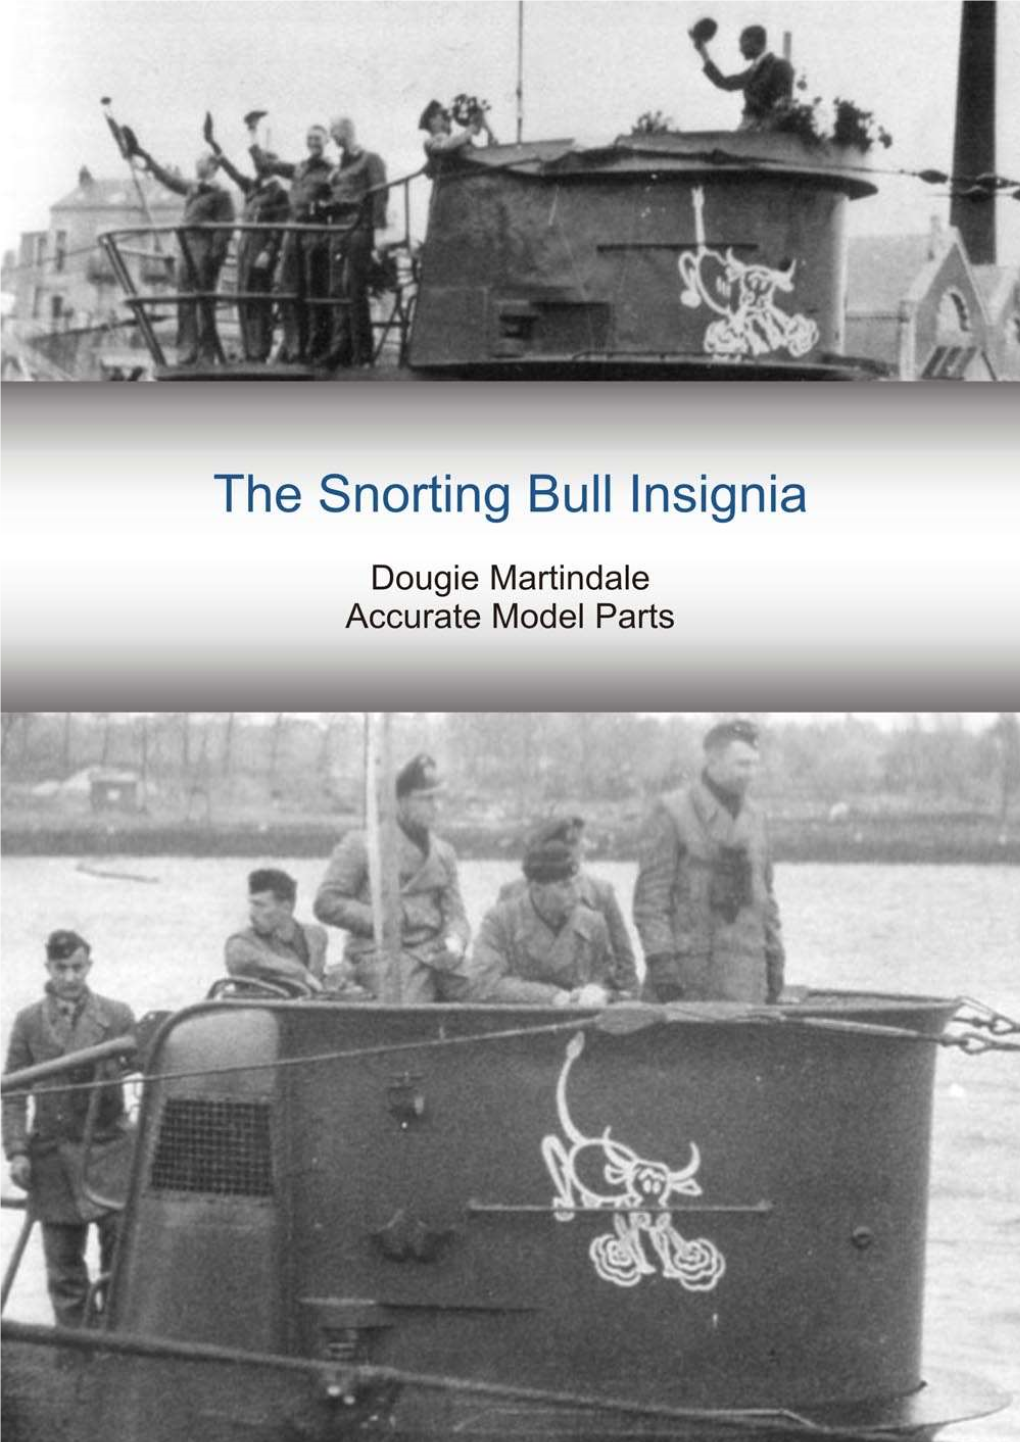 Snorting Bull on 7Th U-Flottille U-Boats Part IV the Laughing Cow of Lorient Part V AMP Decals Part VI References & Photograph Sources